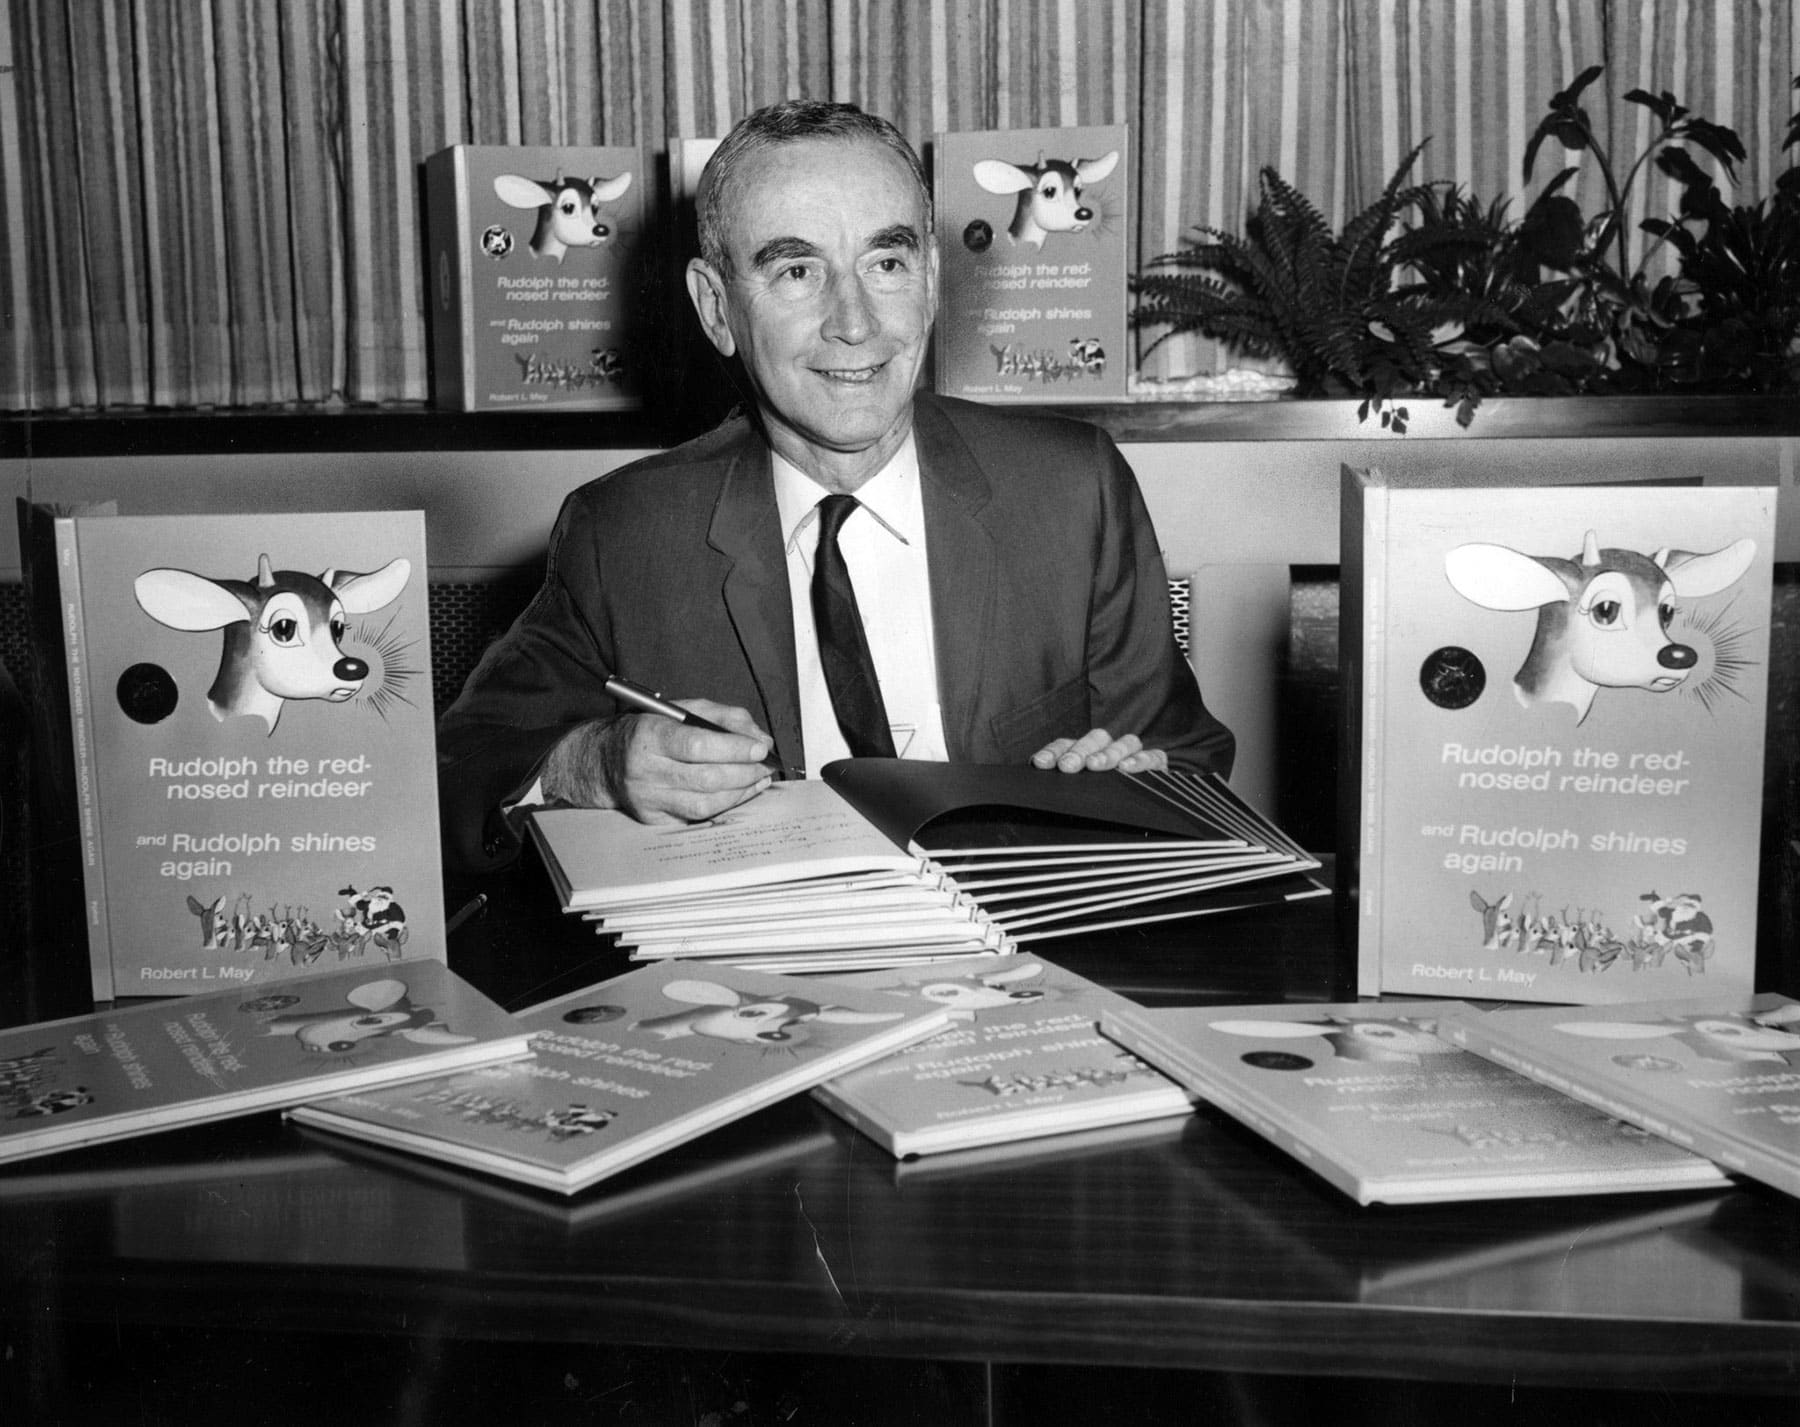 Robert Lewis May sitting behind his desk with copies of the Rudolph the Red-Nosed Reindeer books standing up.